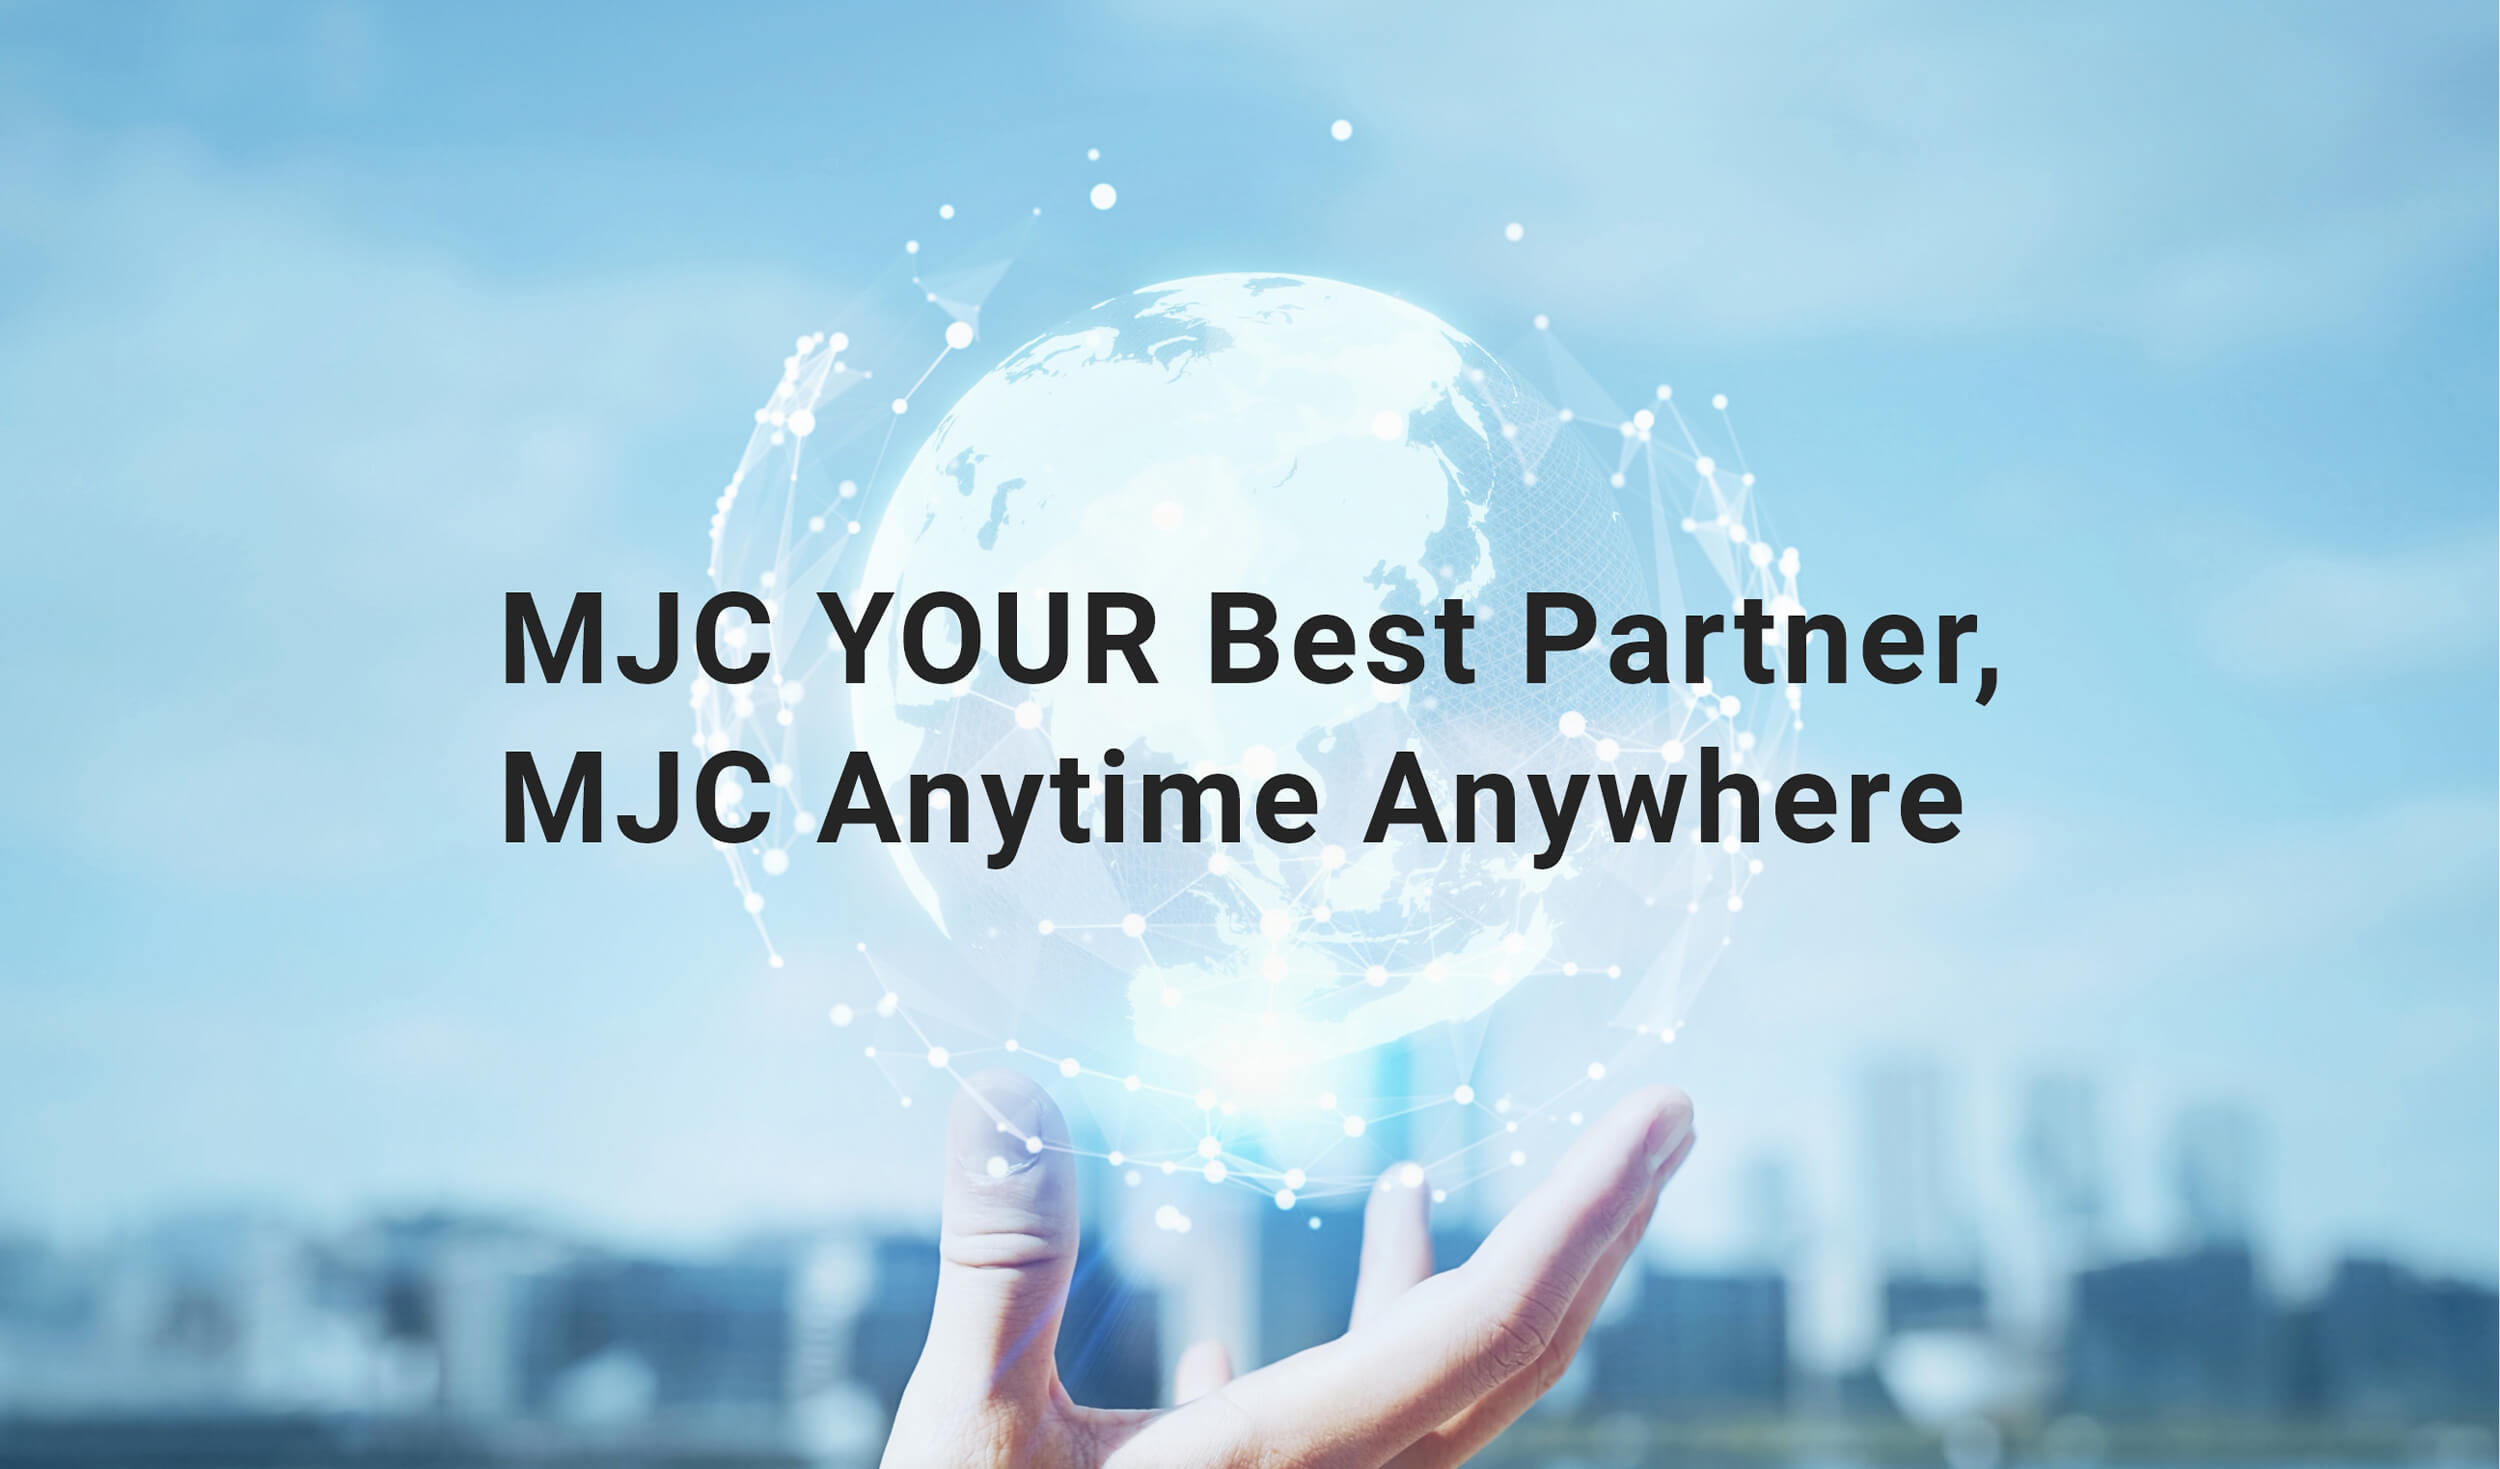 MJC YOUR Best Partner, MJC Anytime Anywhere